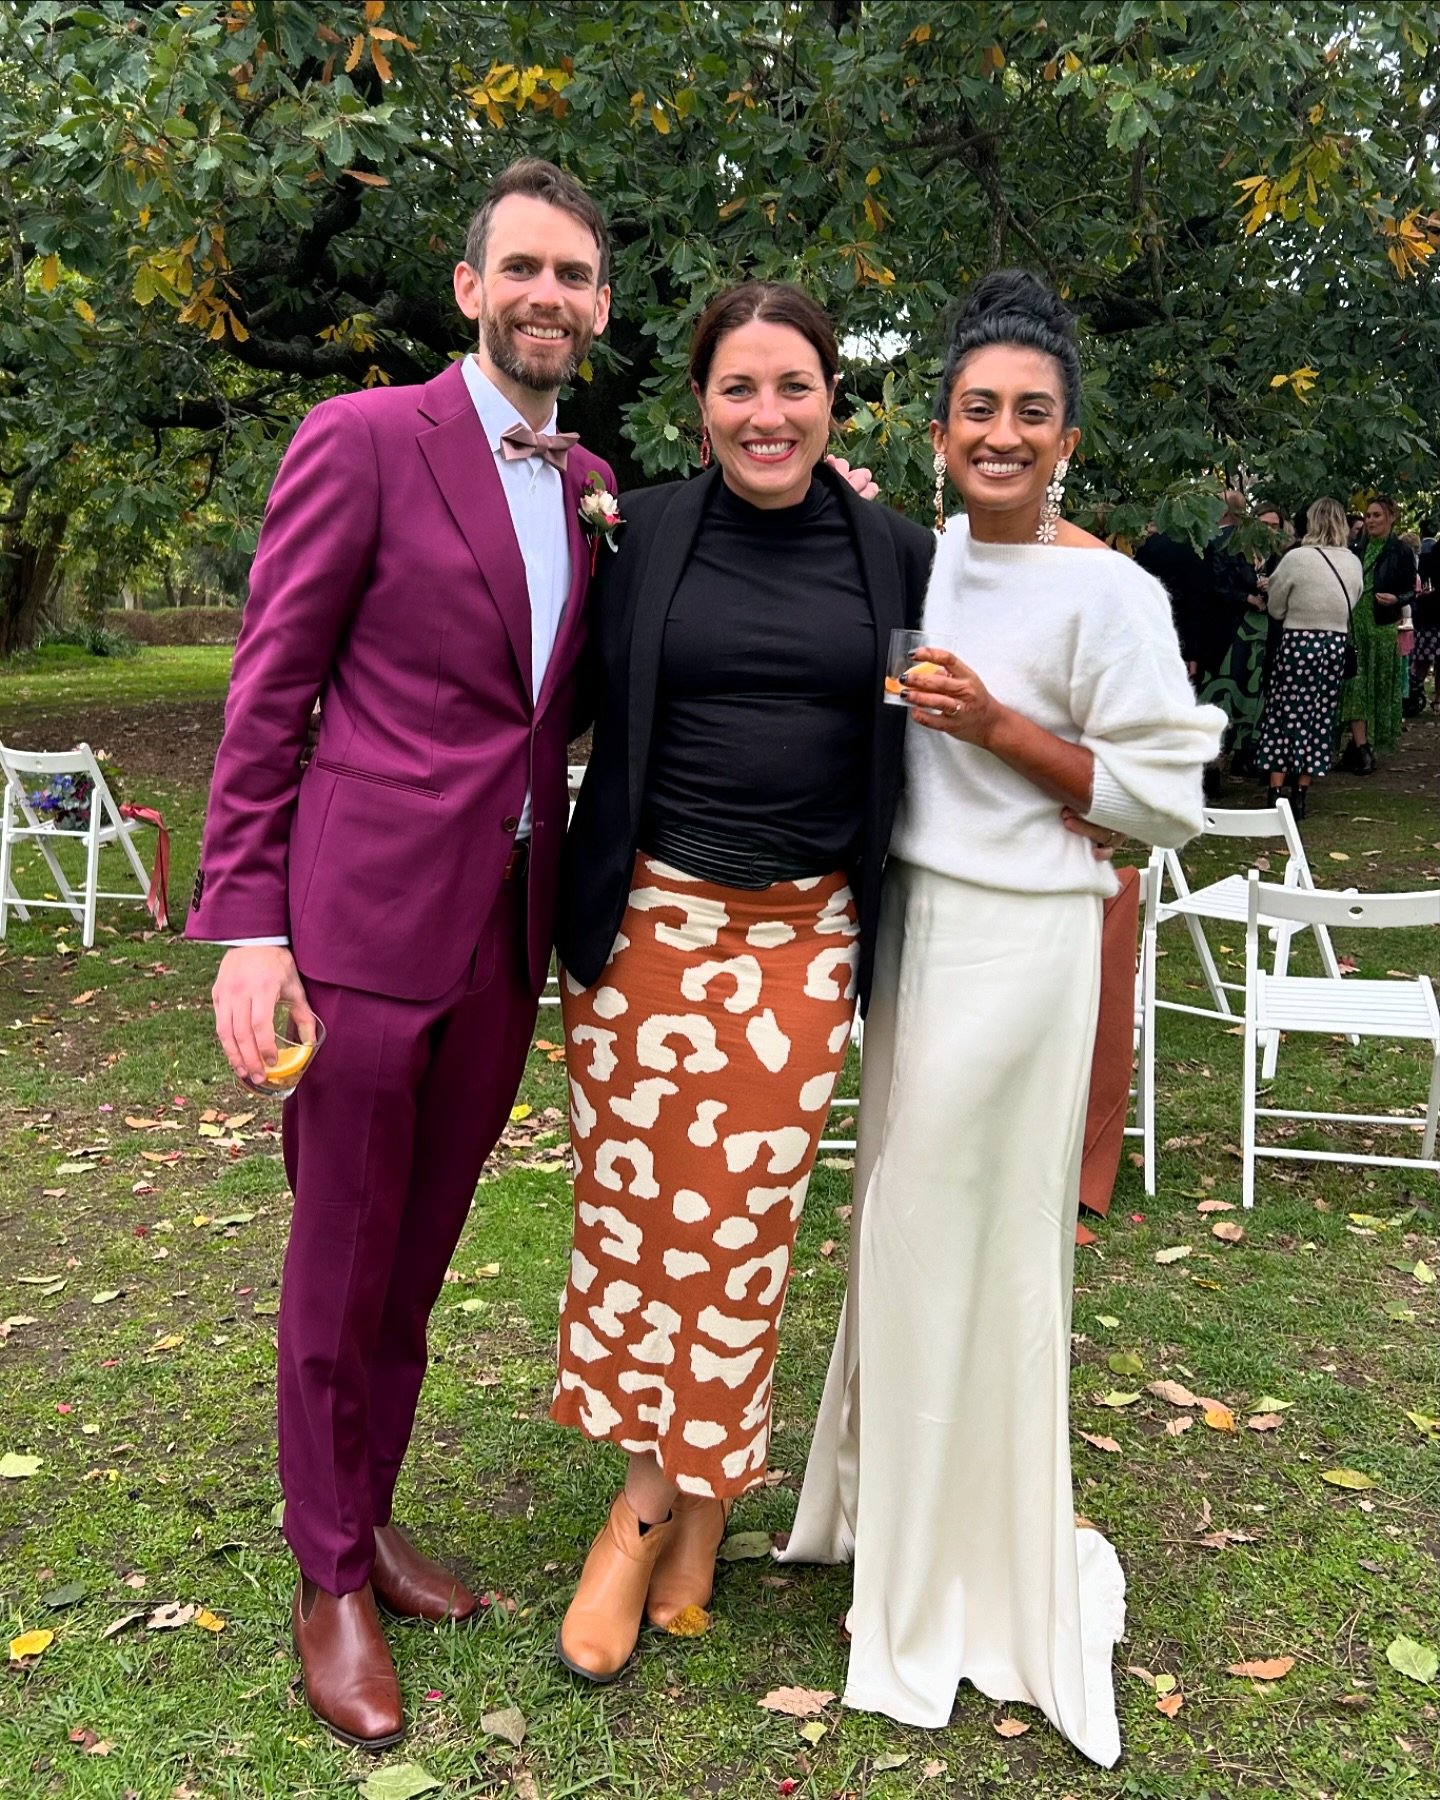 MARRIED! Pete and Rachana made it official this afternoon at @heidemoma and it was pretty special. Their guests flew in from all over the world for it so luckily Melbs put on her best weather ❄️ 😬.
.
They met at a speed dating night in the NT- which